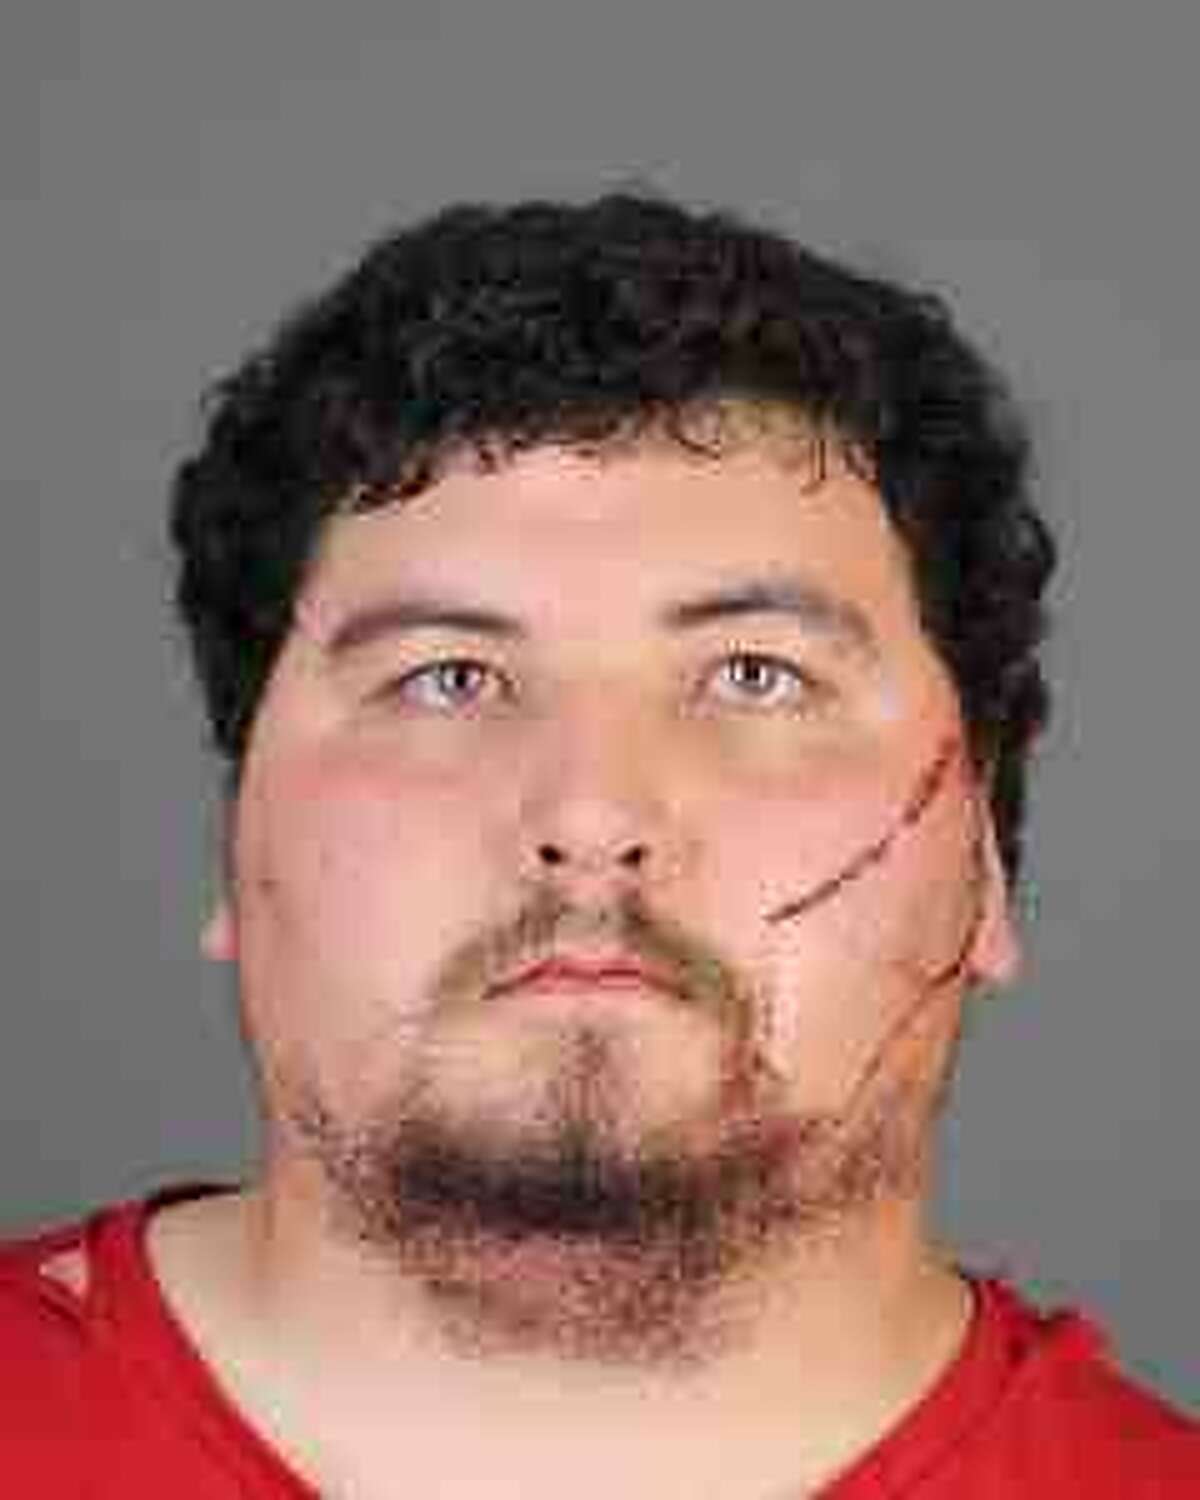 Marcus Nakao, 23, was arrested on Wednesday, July 25, after Albany police said he assaulted a man at a home on Whitehall Road.